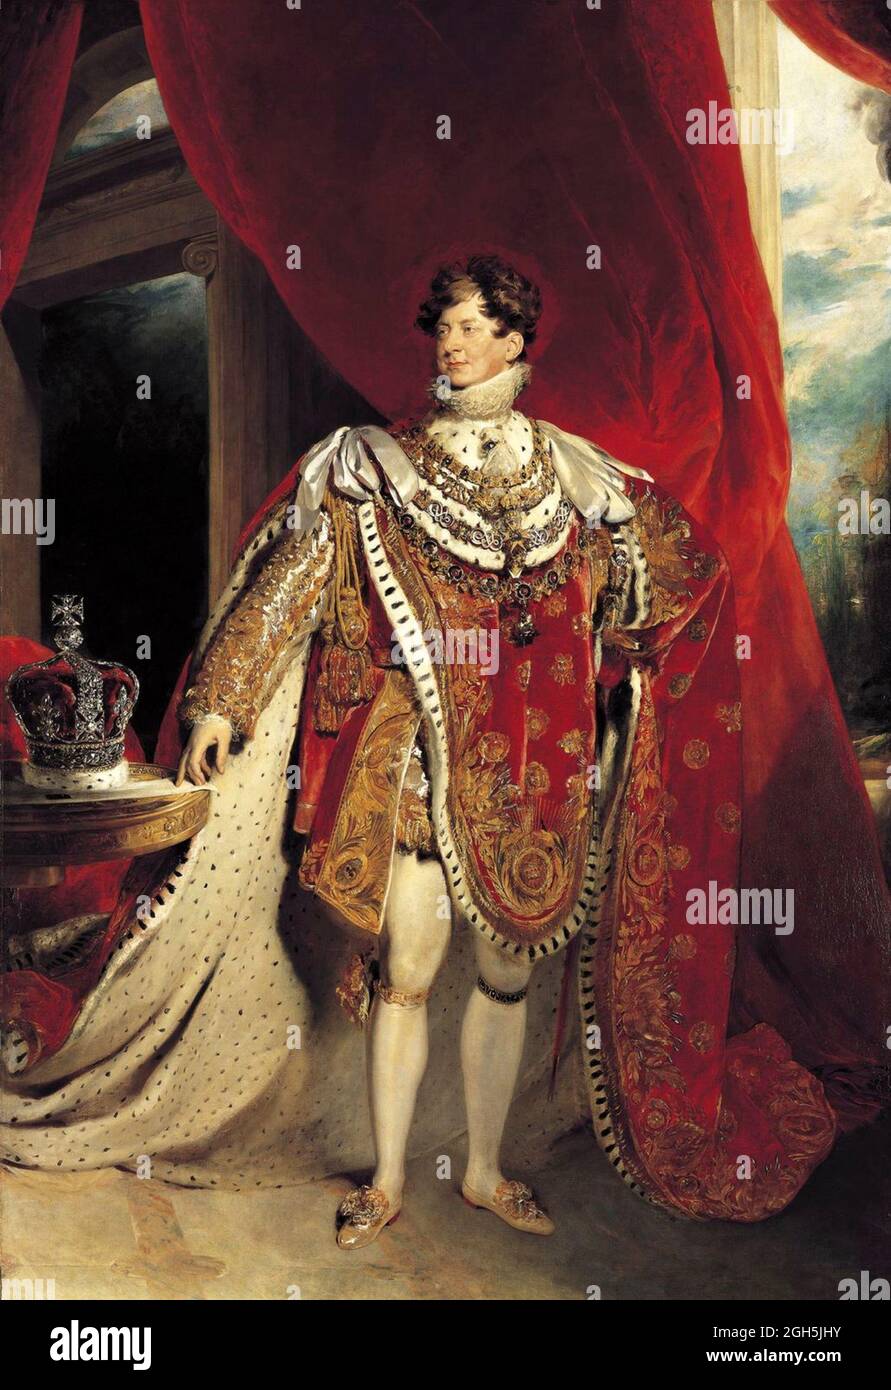 A portrait of King George IV who was King of England from 1820 until 1830 Stock Photo